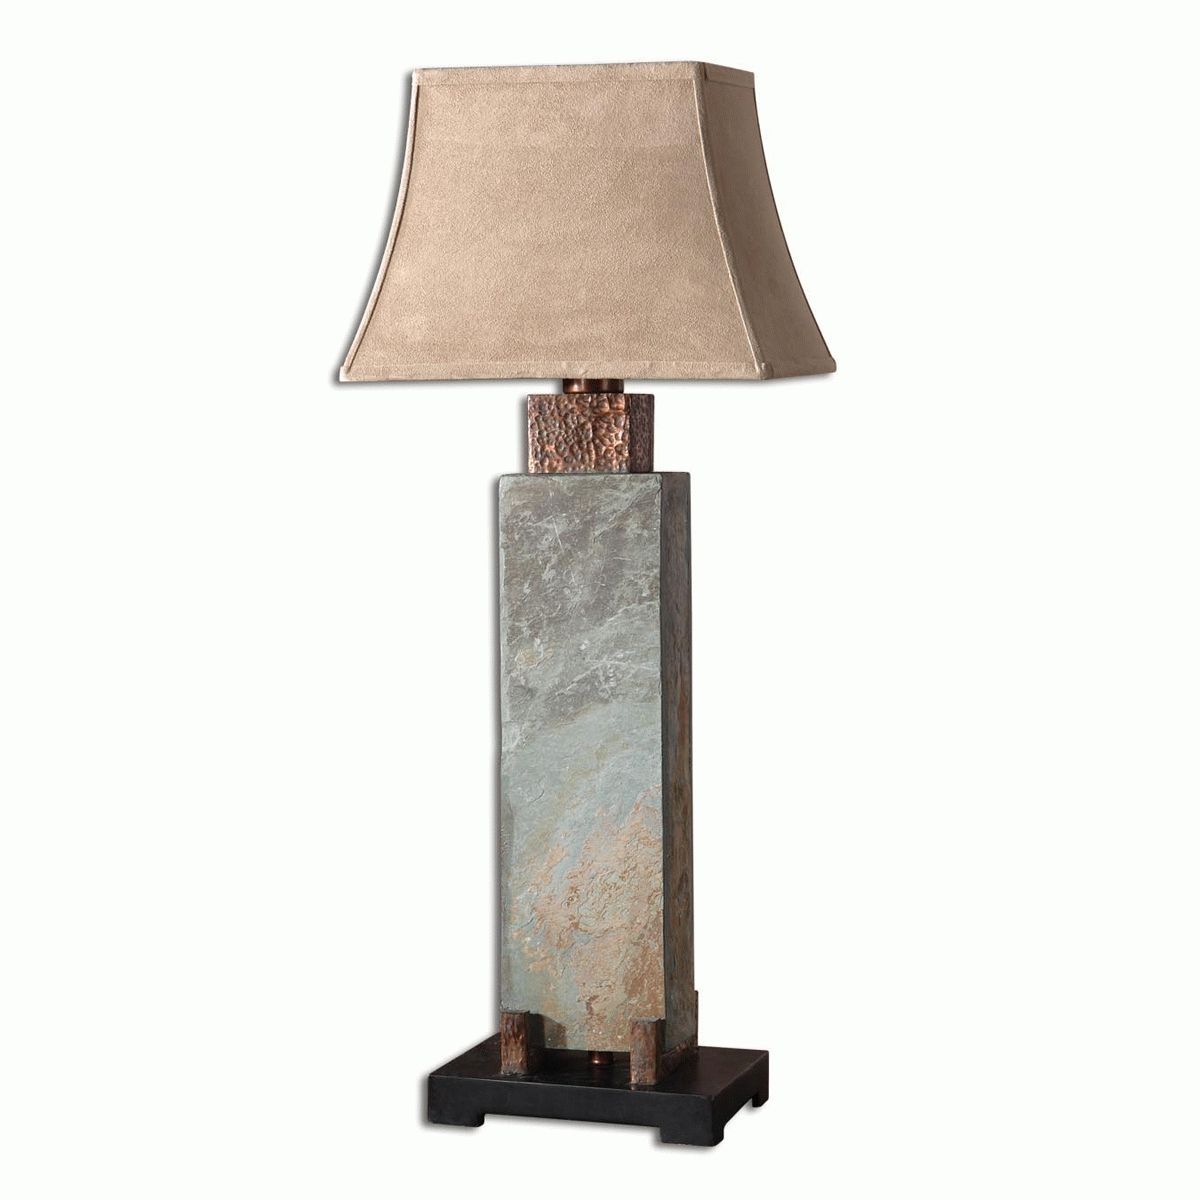 The Best Console Gorgeous Rustic Table Western Modern Picture Of Inside Western Table Lamps For Living Room (Photo 11 of 15)